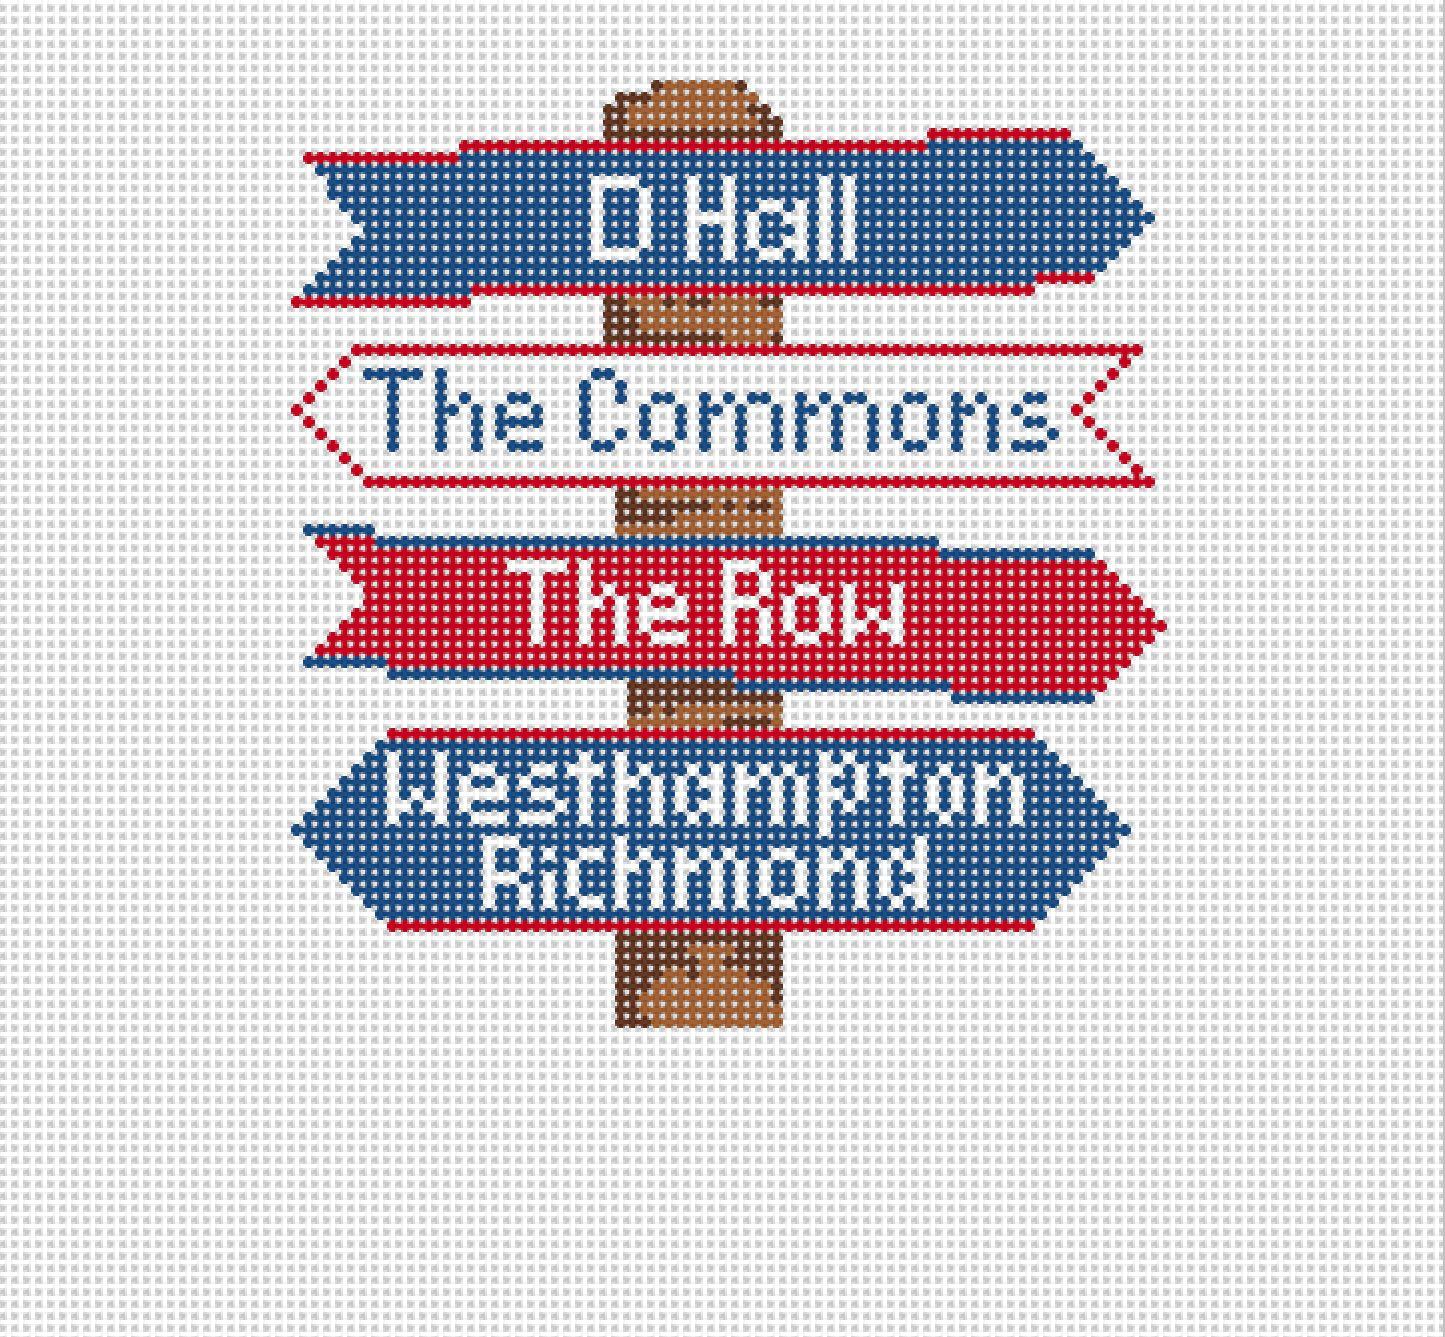 Richmond College Icon Destination Sign - Needlepoint by Laura